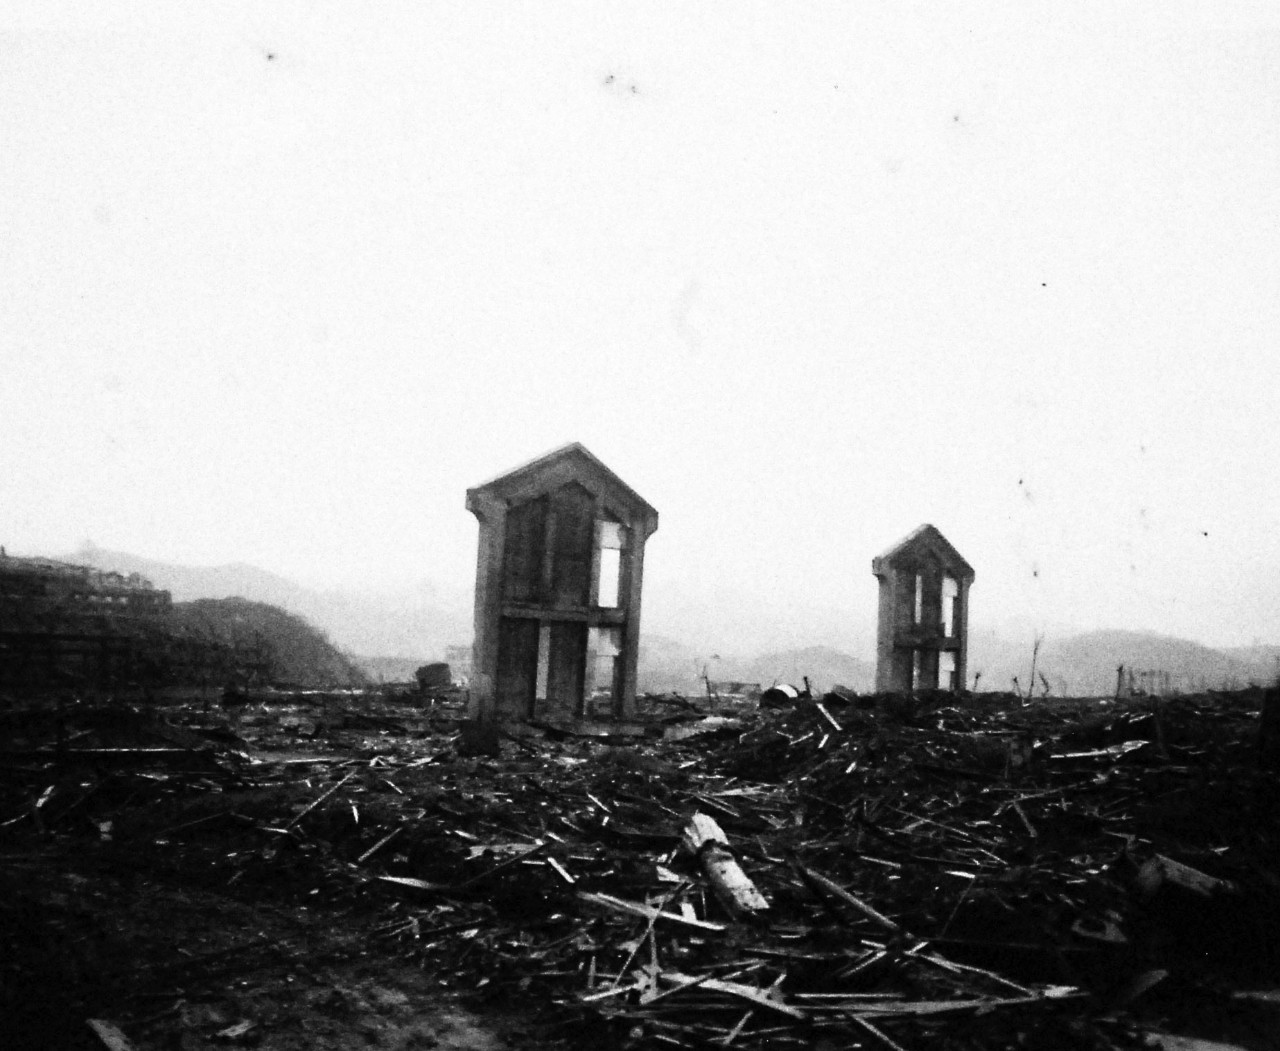 127-GW-1643-137424:     Nagasaki, Japan, 1945.   Two lonely, upright sentinels in the ocean of rubble, where the atomic bomb exploded.  They may have been part of a school, warehouse or industrial plant.     Photographed by September 16, 1945.        Official U.S. Marine Corps Photograph, now in the collections of the National Archives.  (2016/10/25).